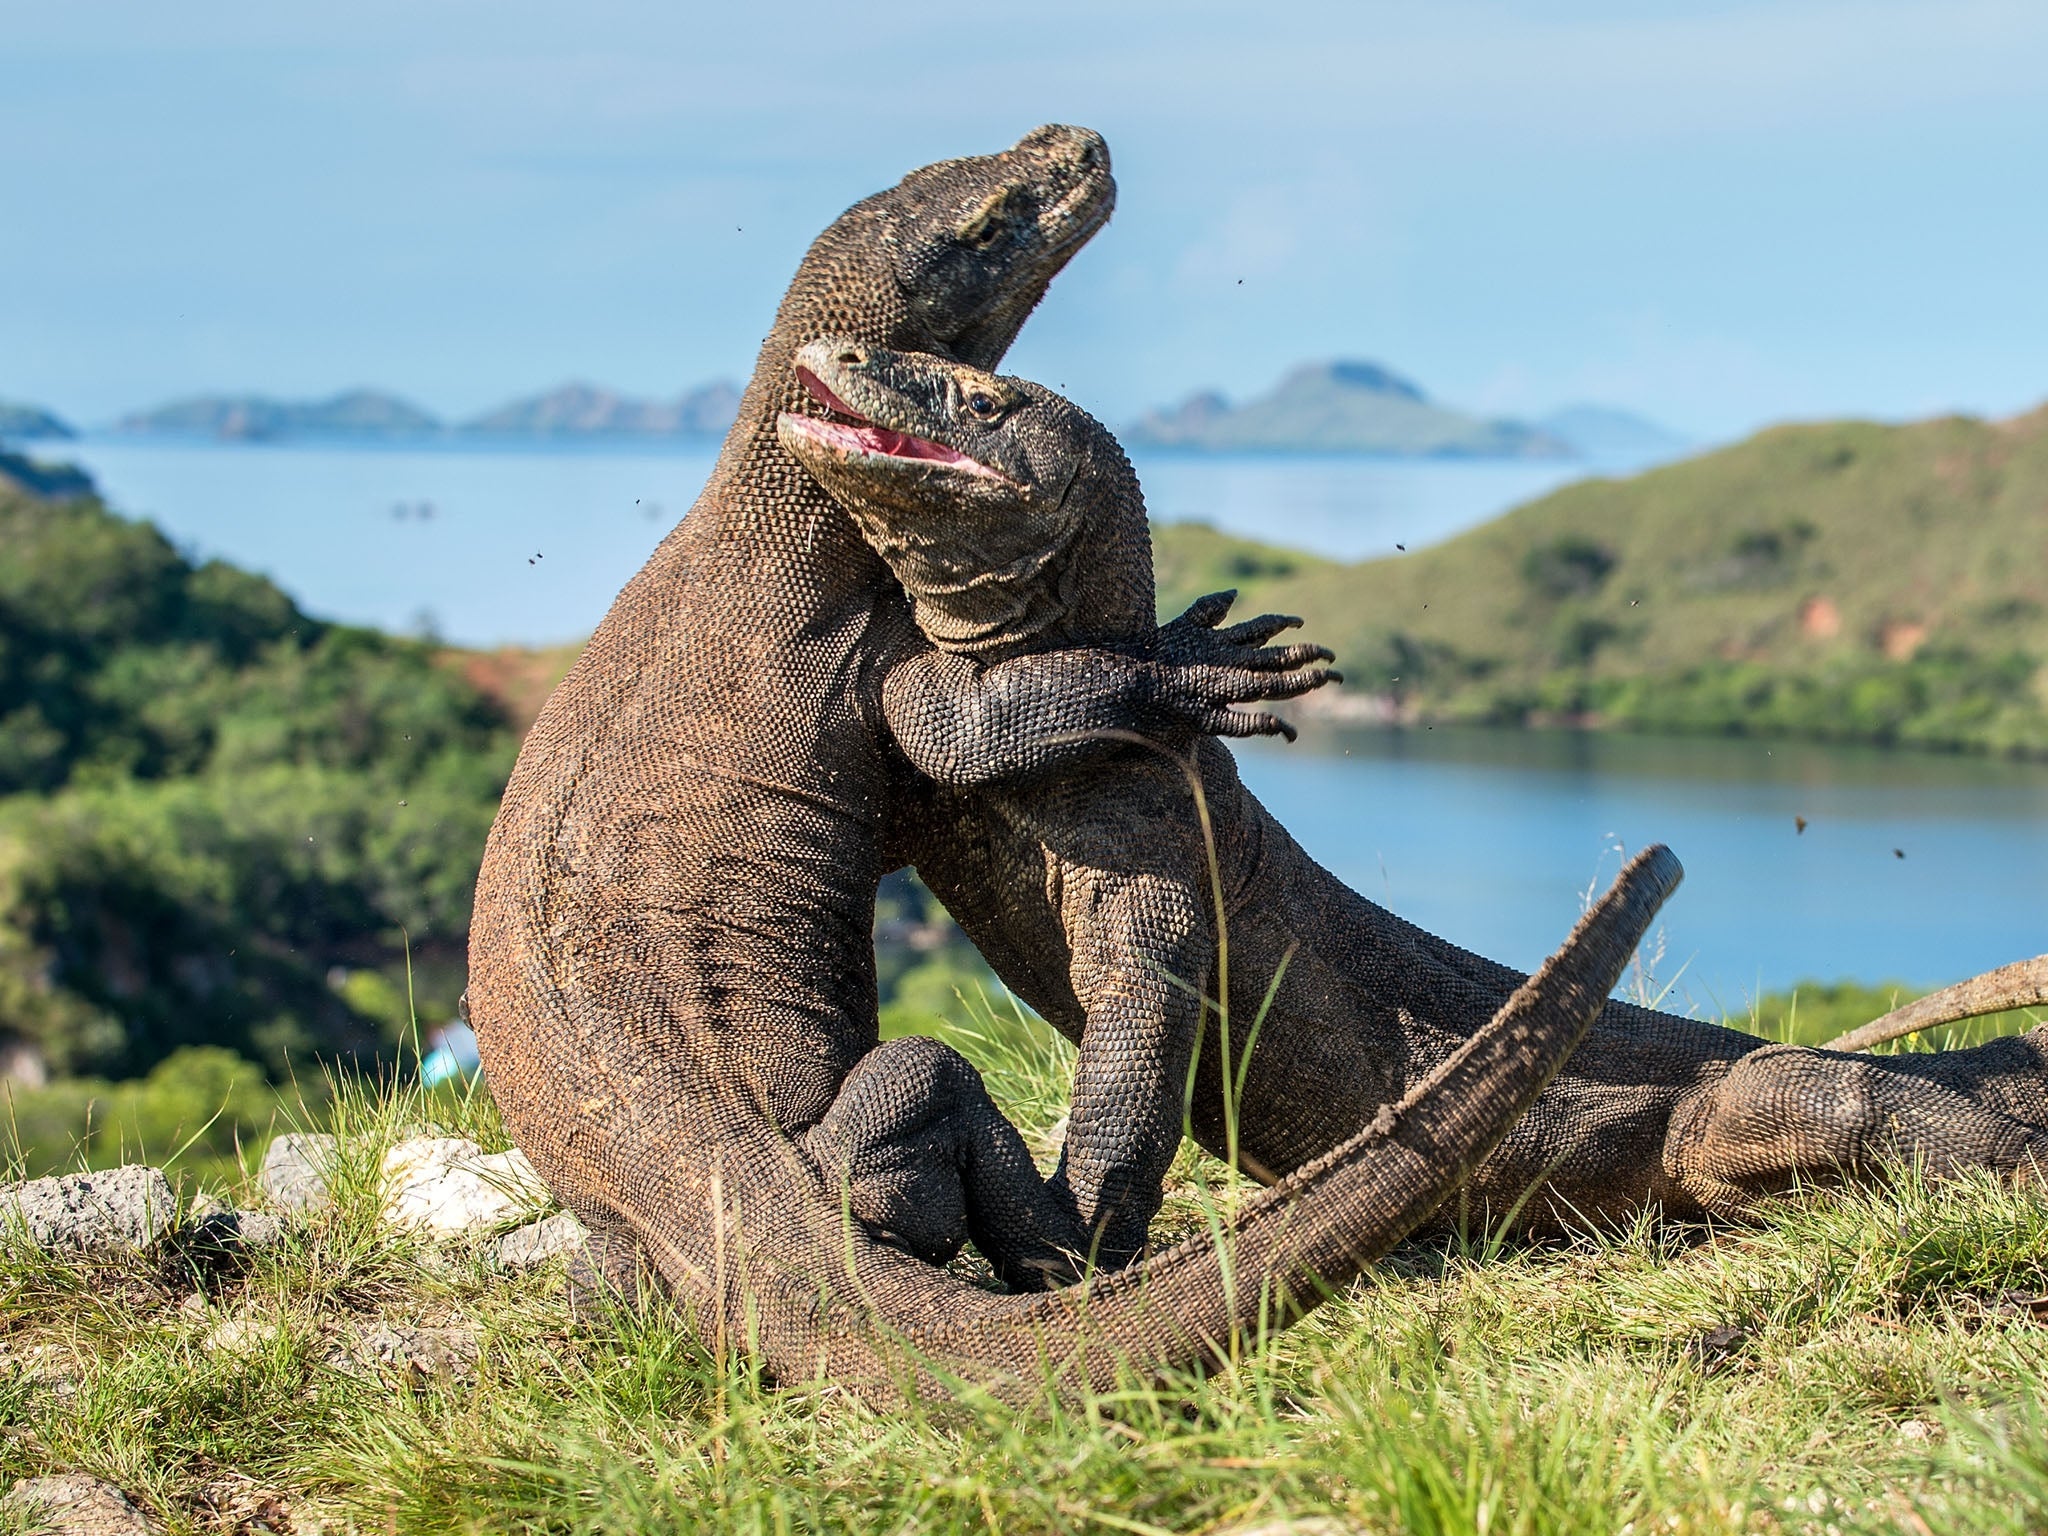 File: Indonesia is home to the world’s largest lizard, the Komodo dragon, which has inhabited the country’s islands for millions of years